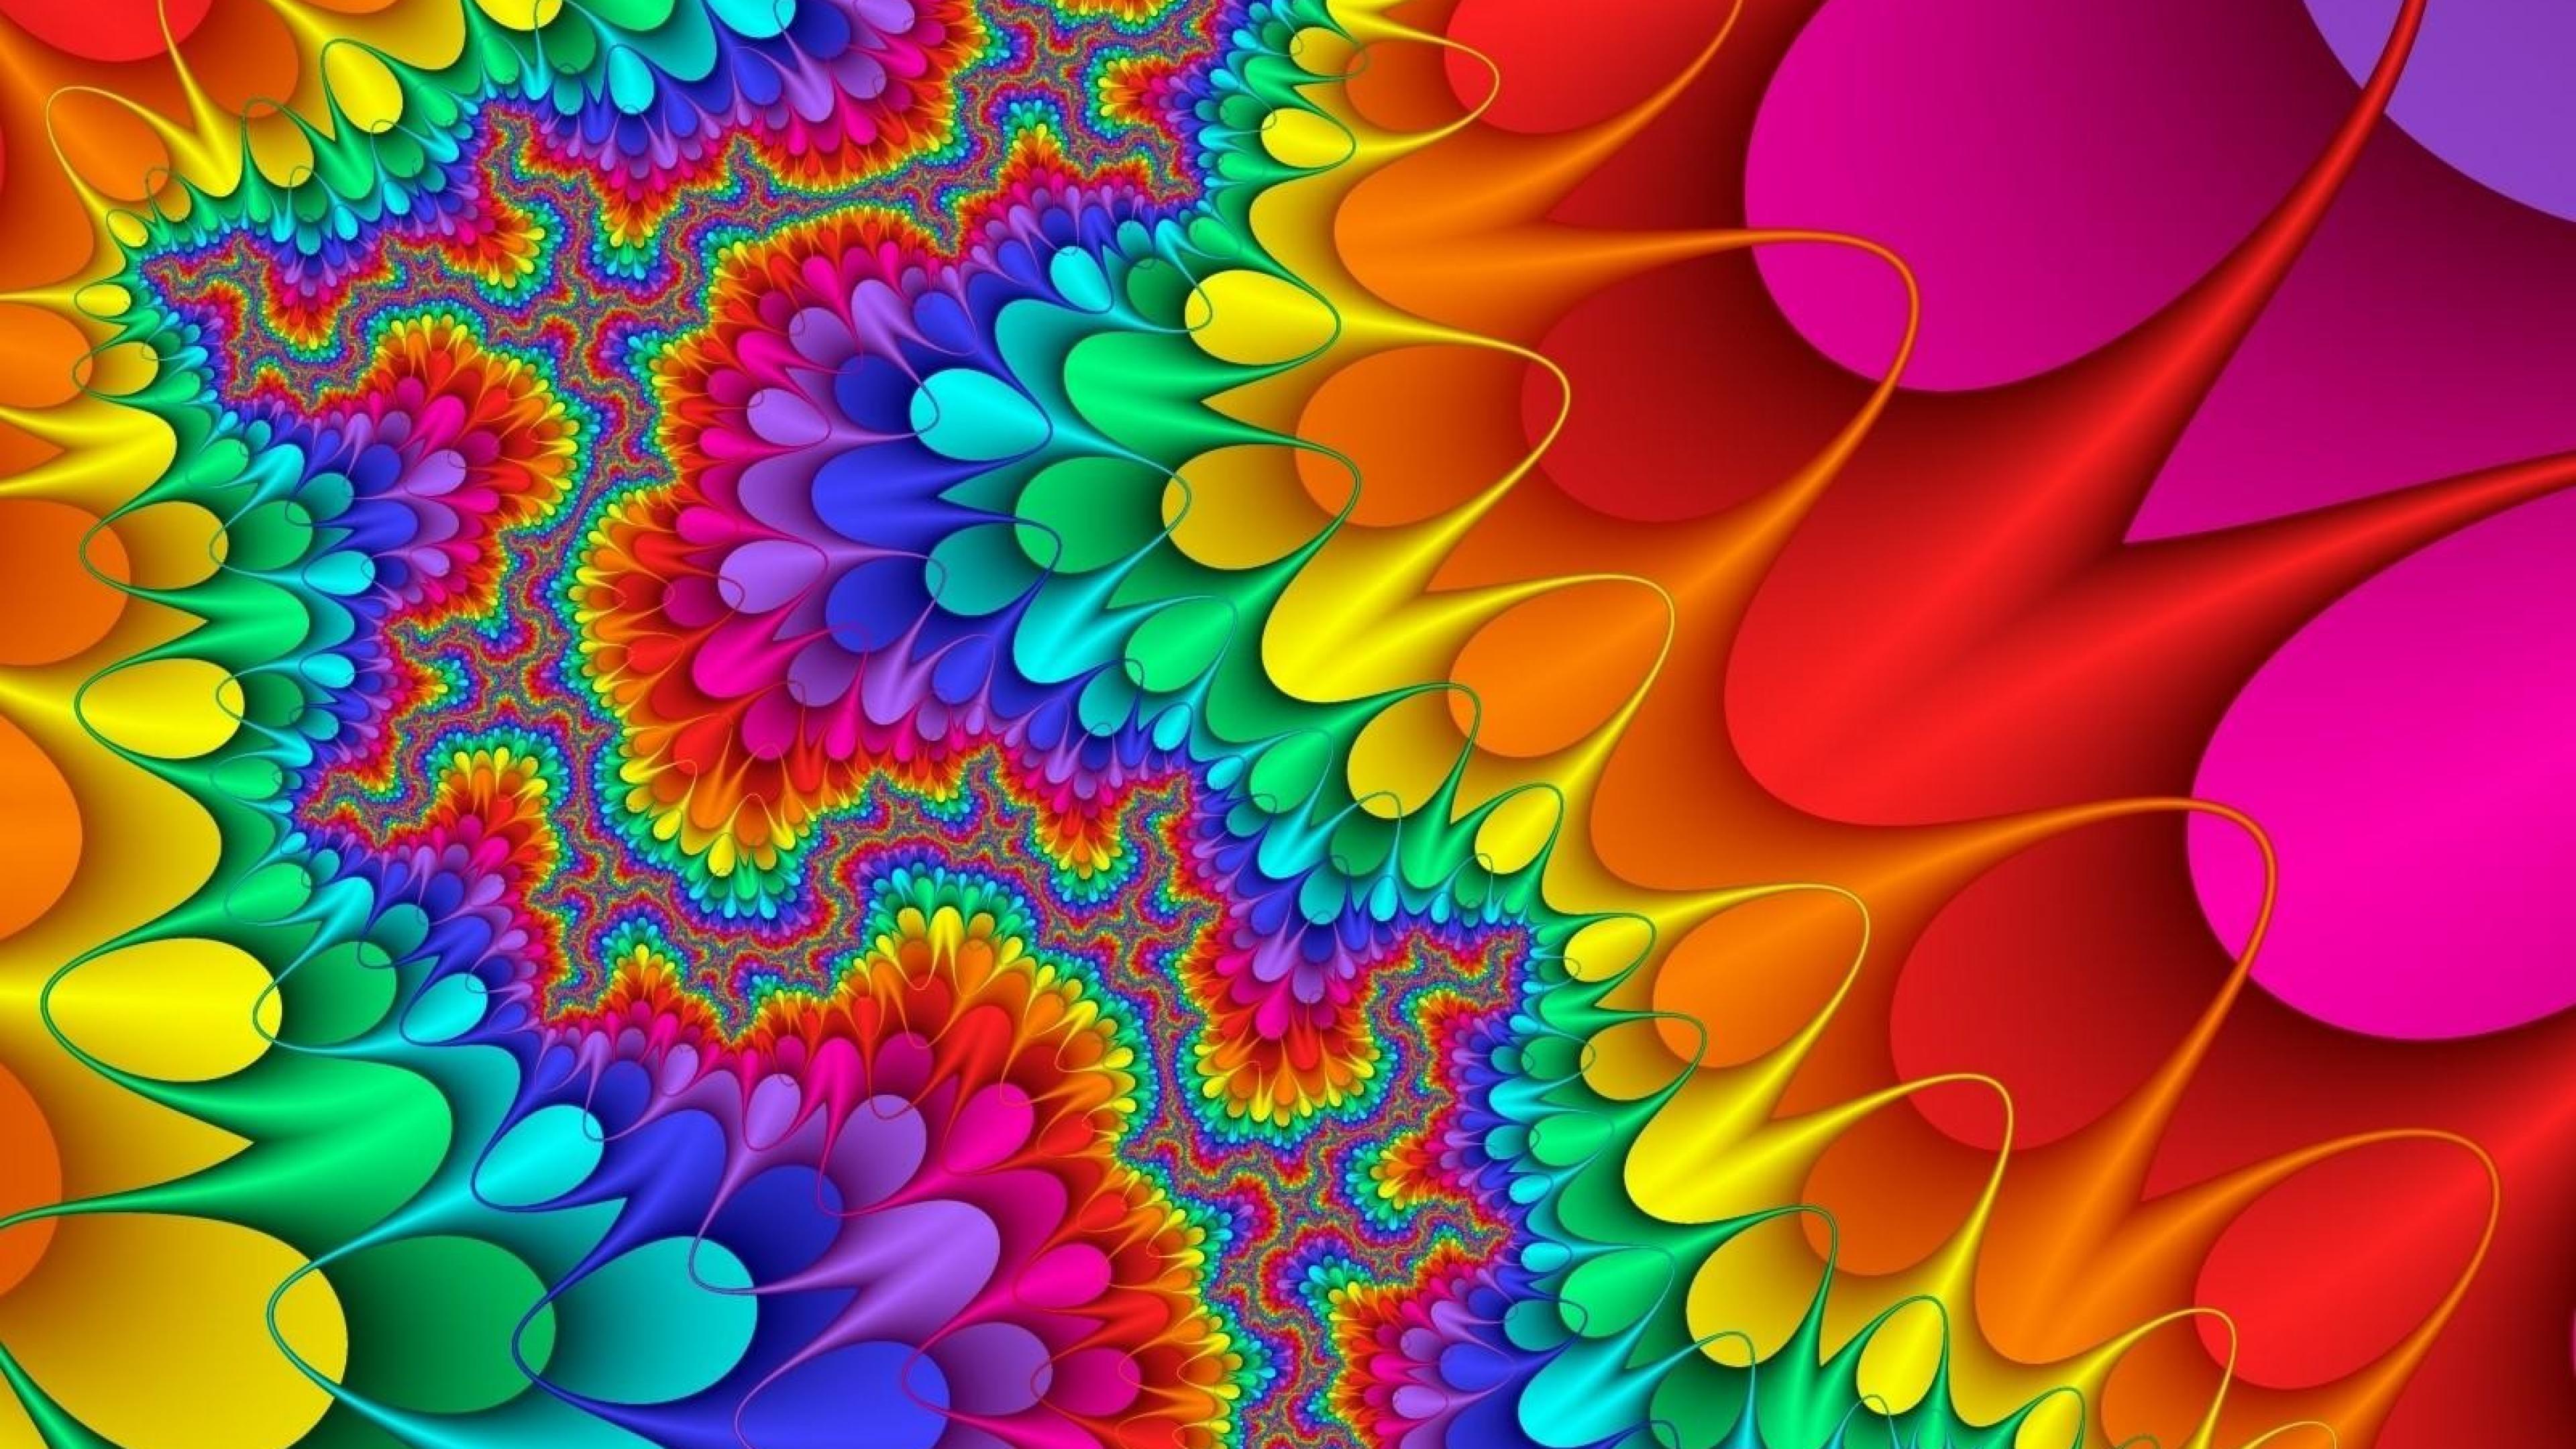 Colorful Abstract Desktop Wallpaper Free Colorful Abstract Desktop Background